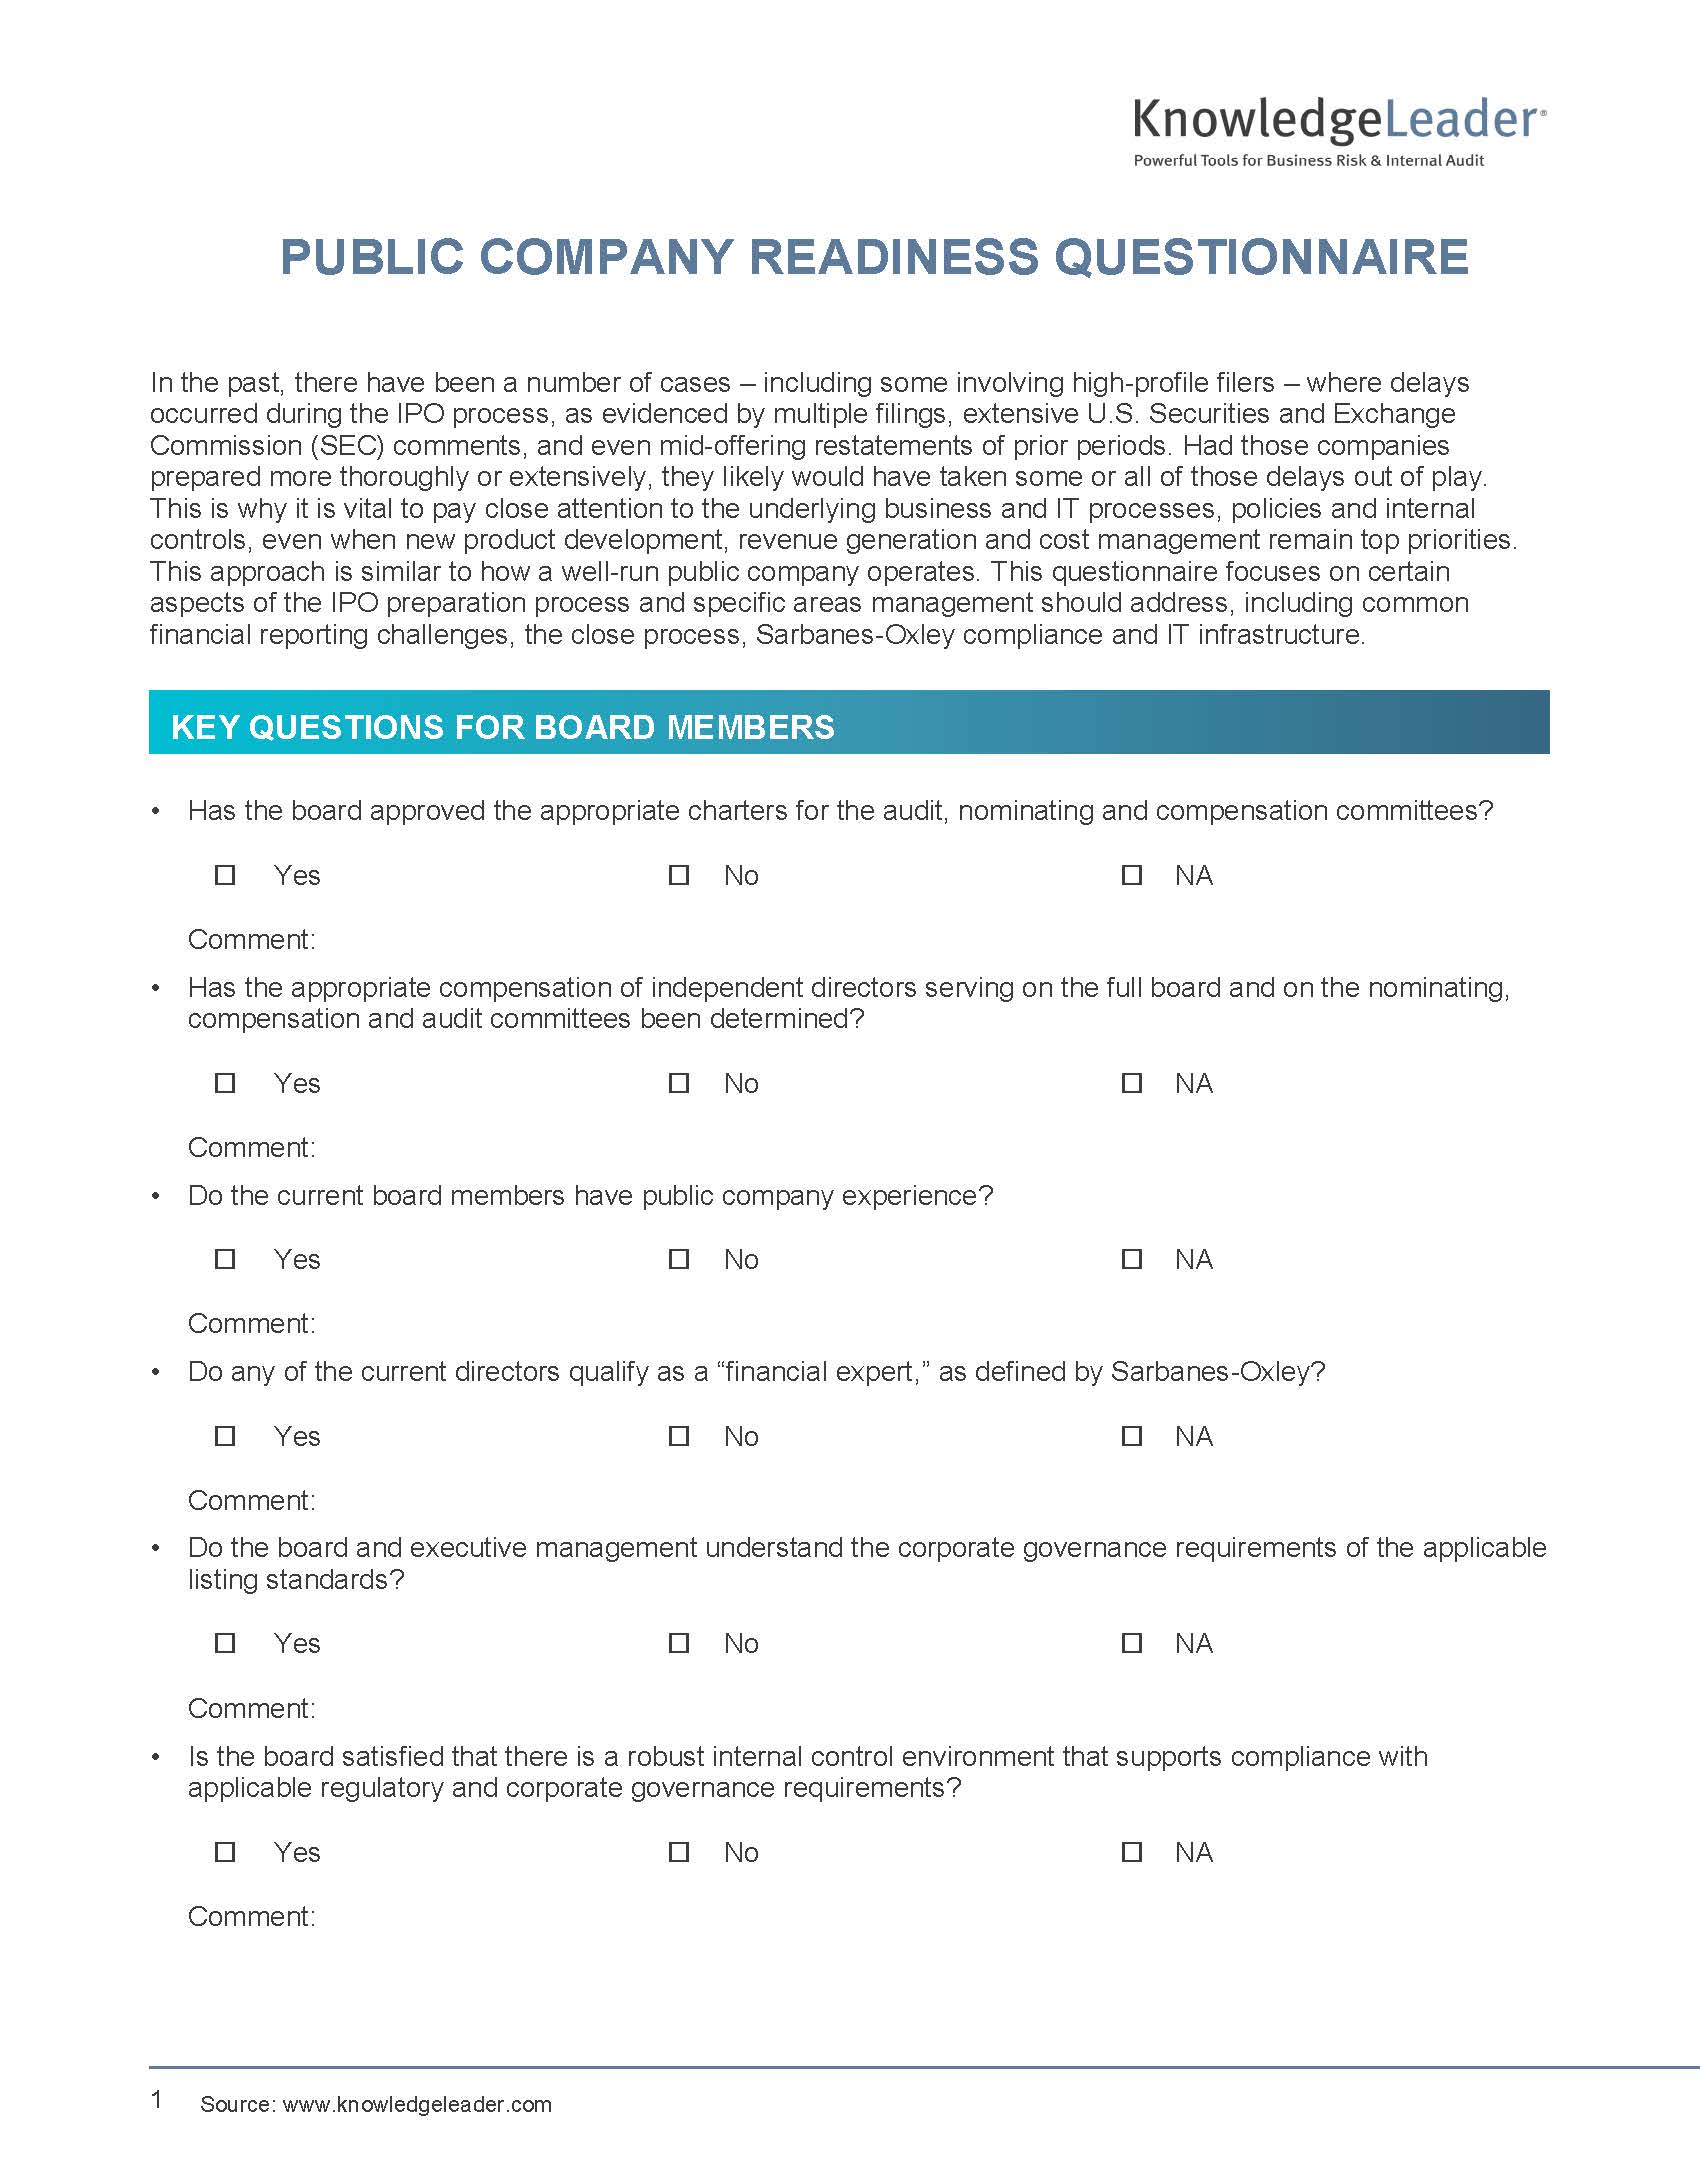 Screenshot of the first page of Public Company Readiness Questionnaire